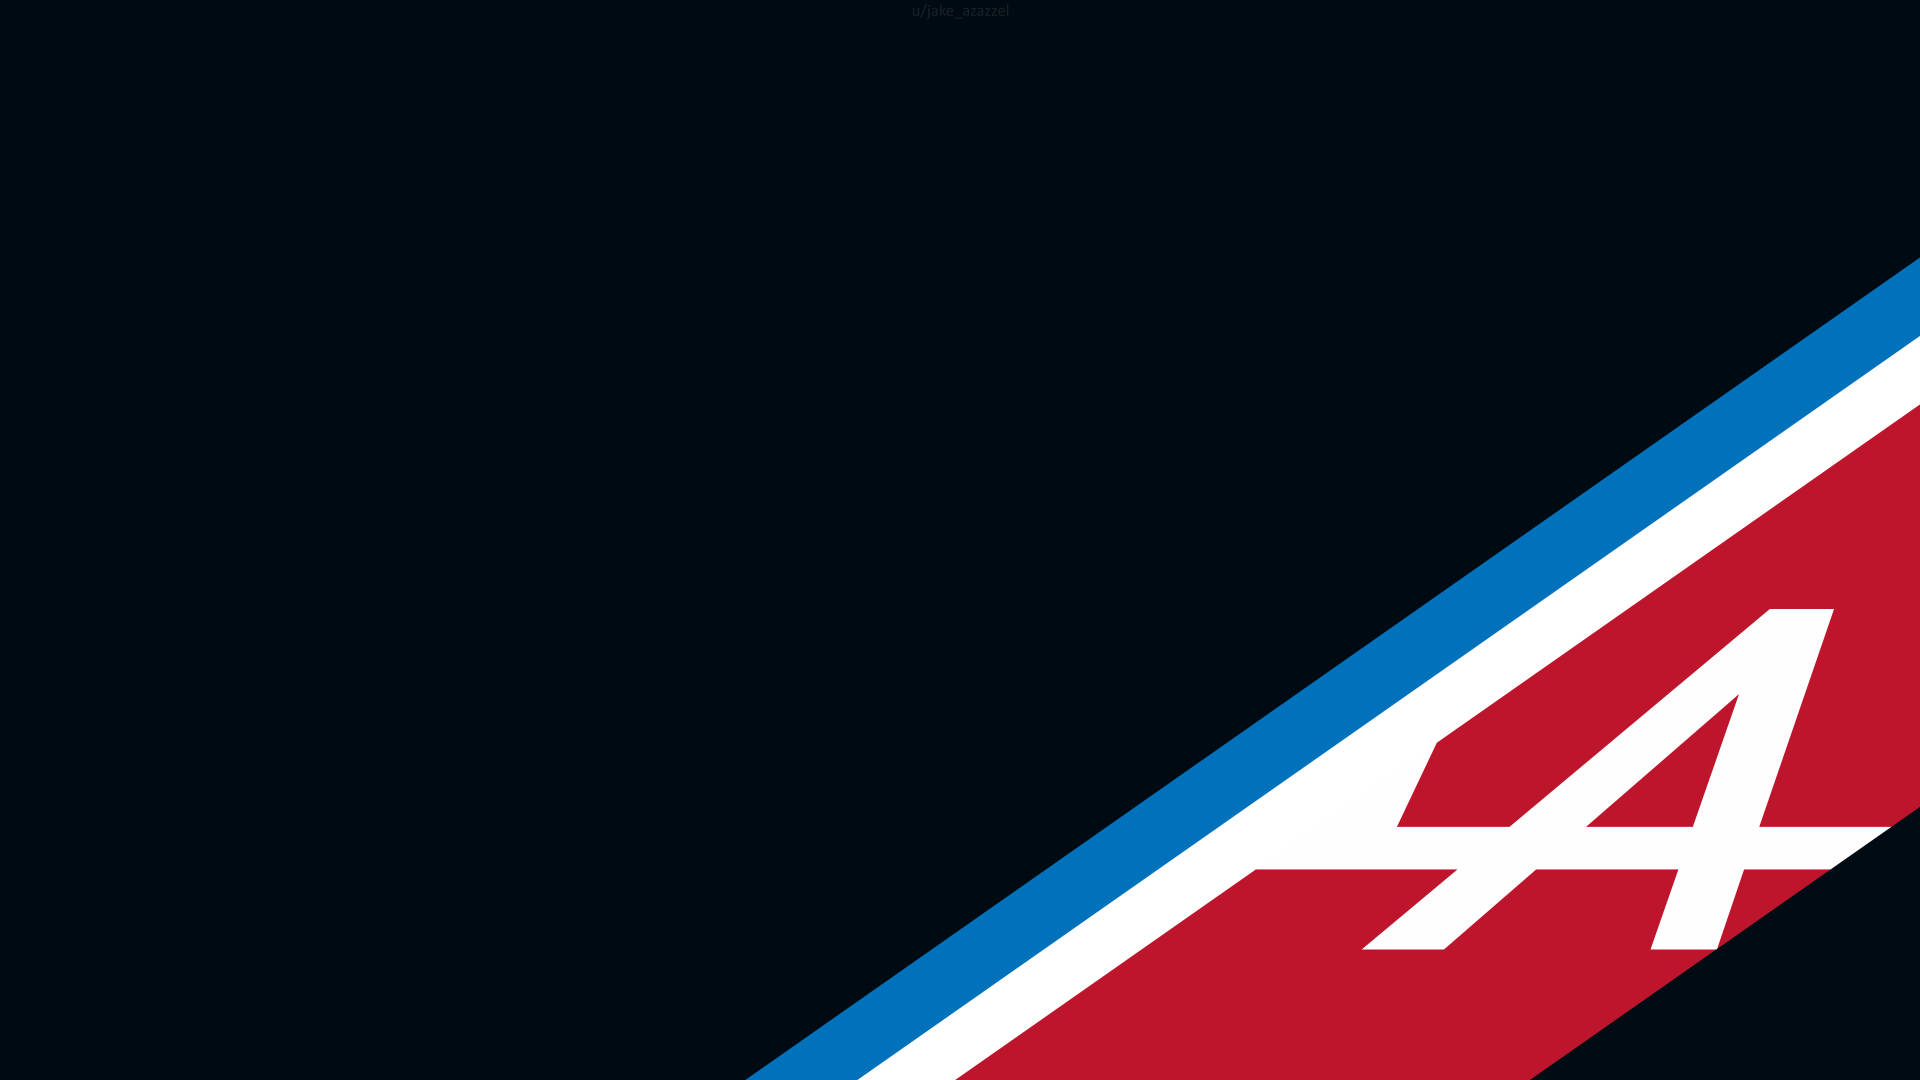 Blue, Red, And White Alpine Logo Wallpaper